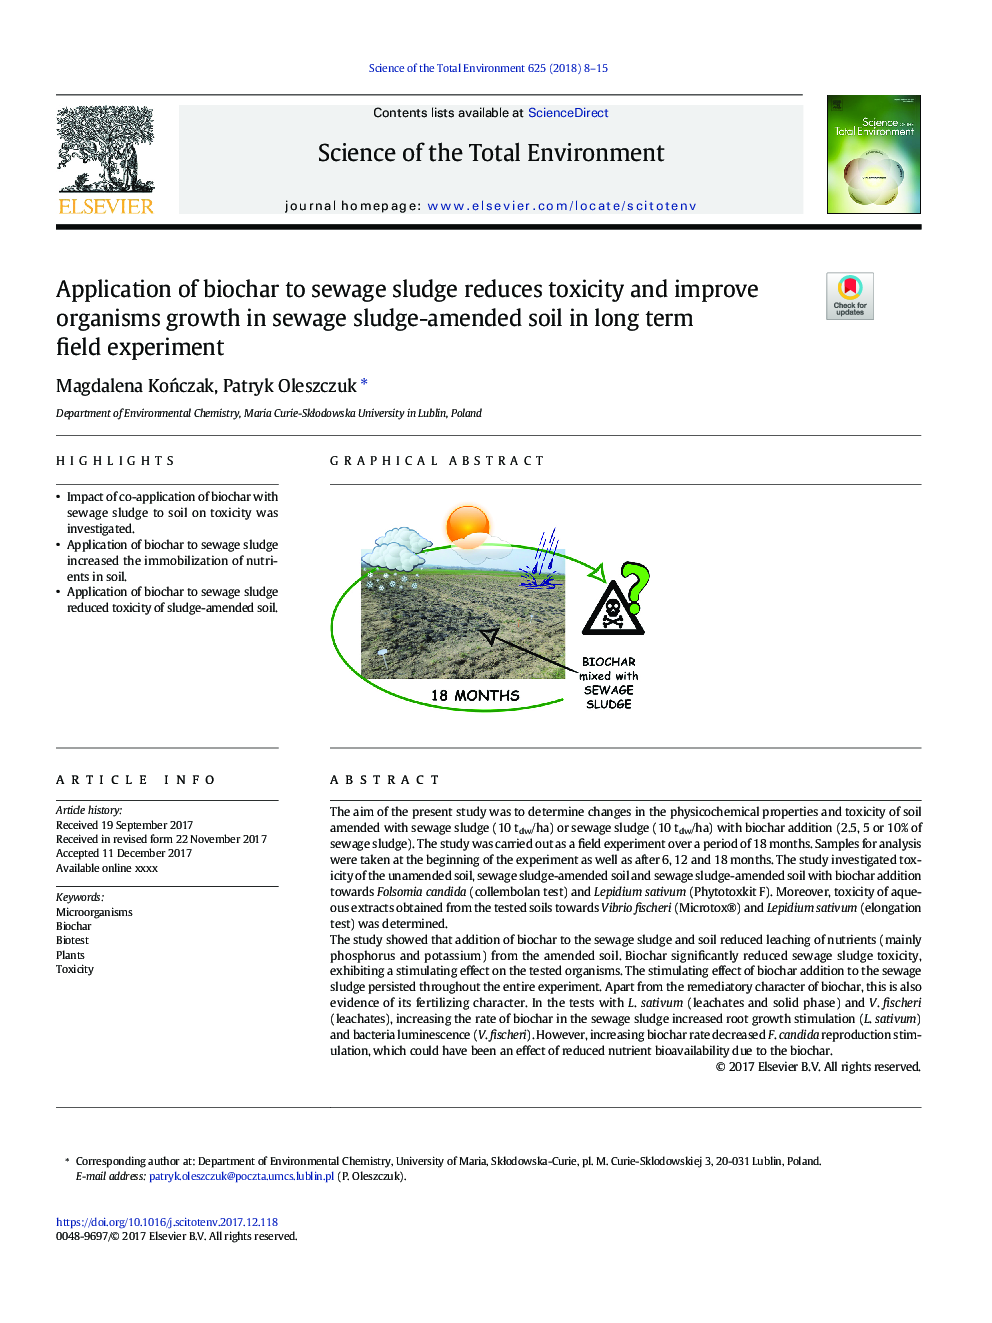 Application of biochar to sewage sludge reduces toxicity and improve organisms growth in sewage sludge-amended soil in long term field experiment